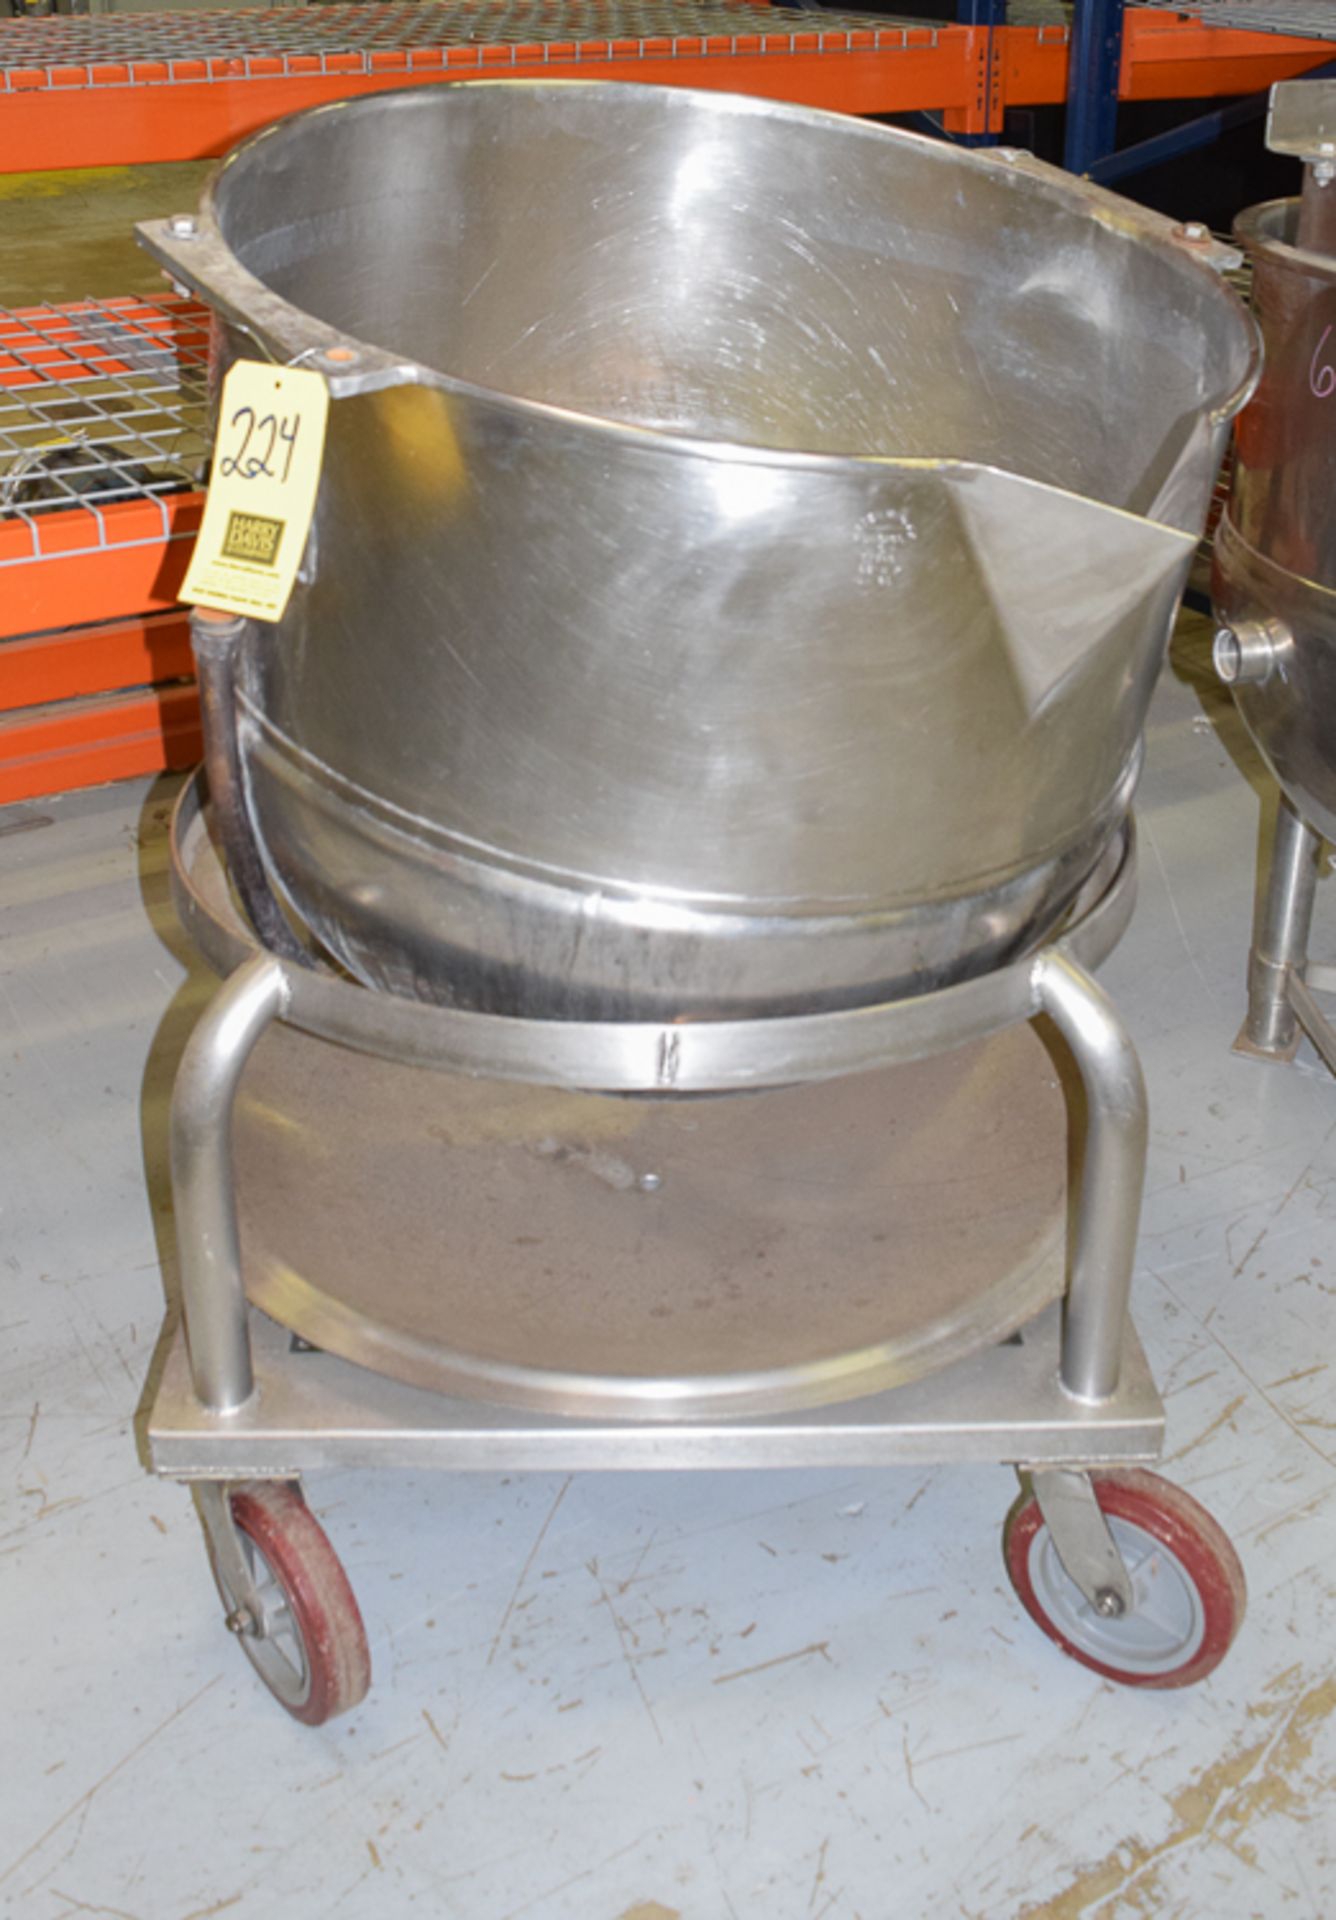 S/S Kettle 150 Gallon with Portable Base, Rigging Fee: Please Contact US Rigging 920-655-2767